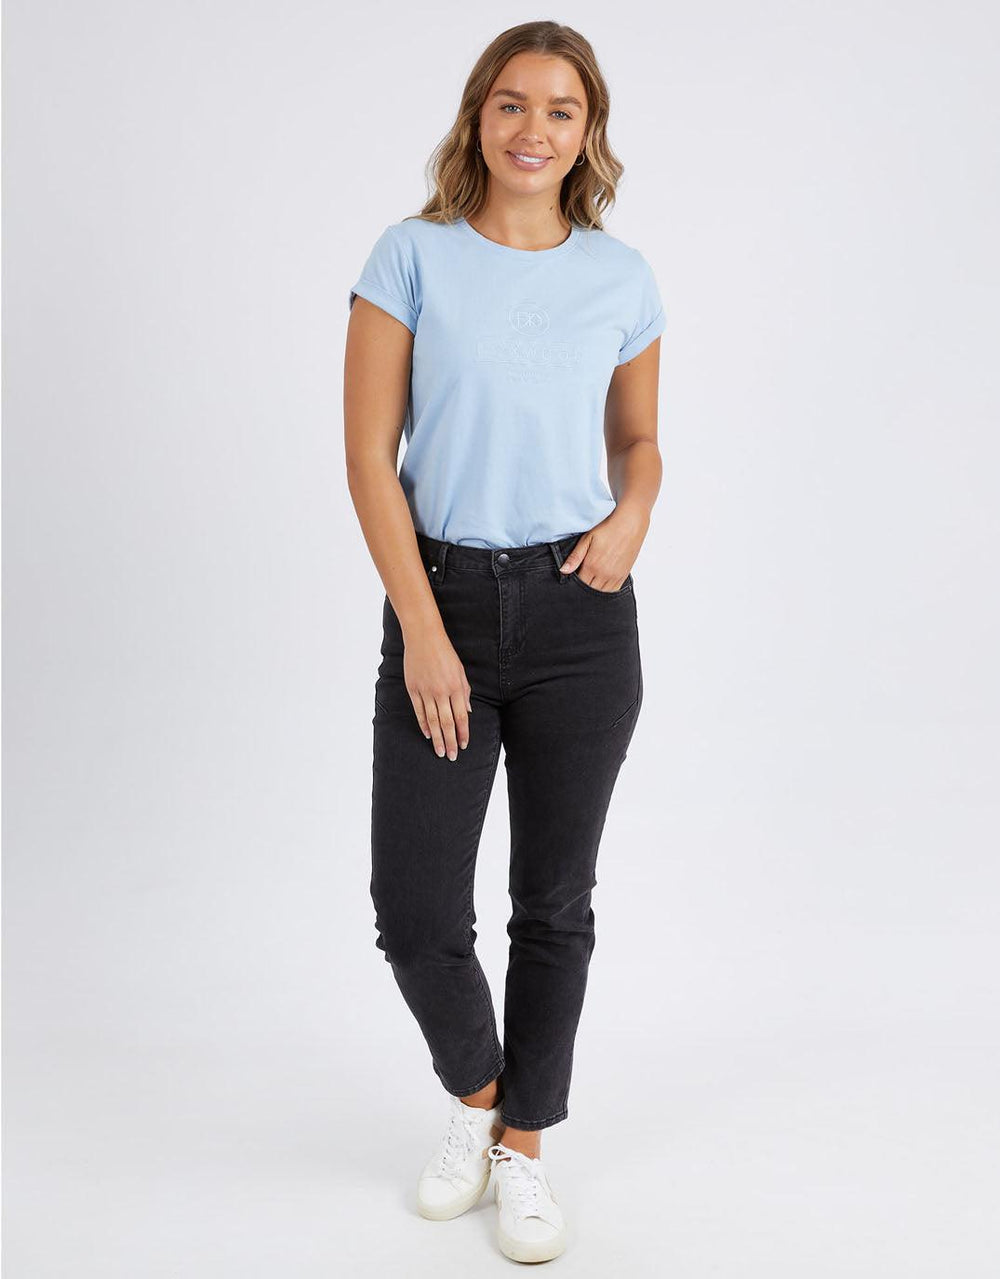 Foxwood - Everyday Tee - Sky Blue - White & Co Living Tops